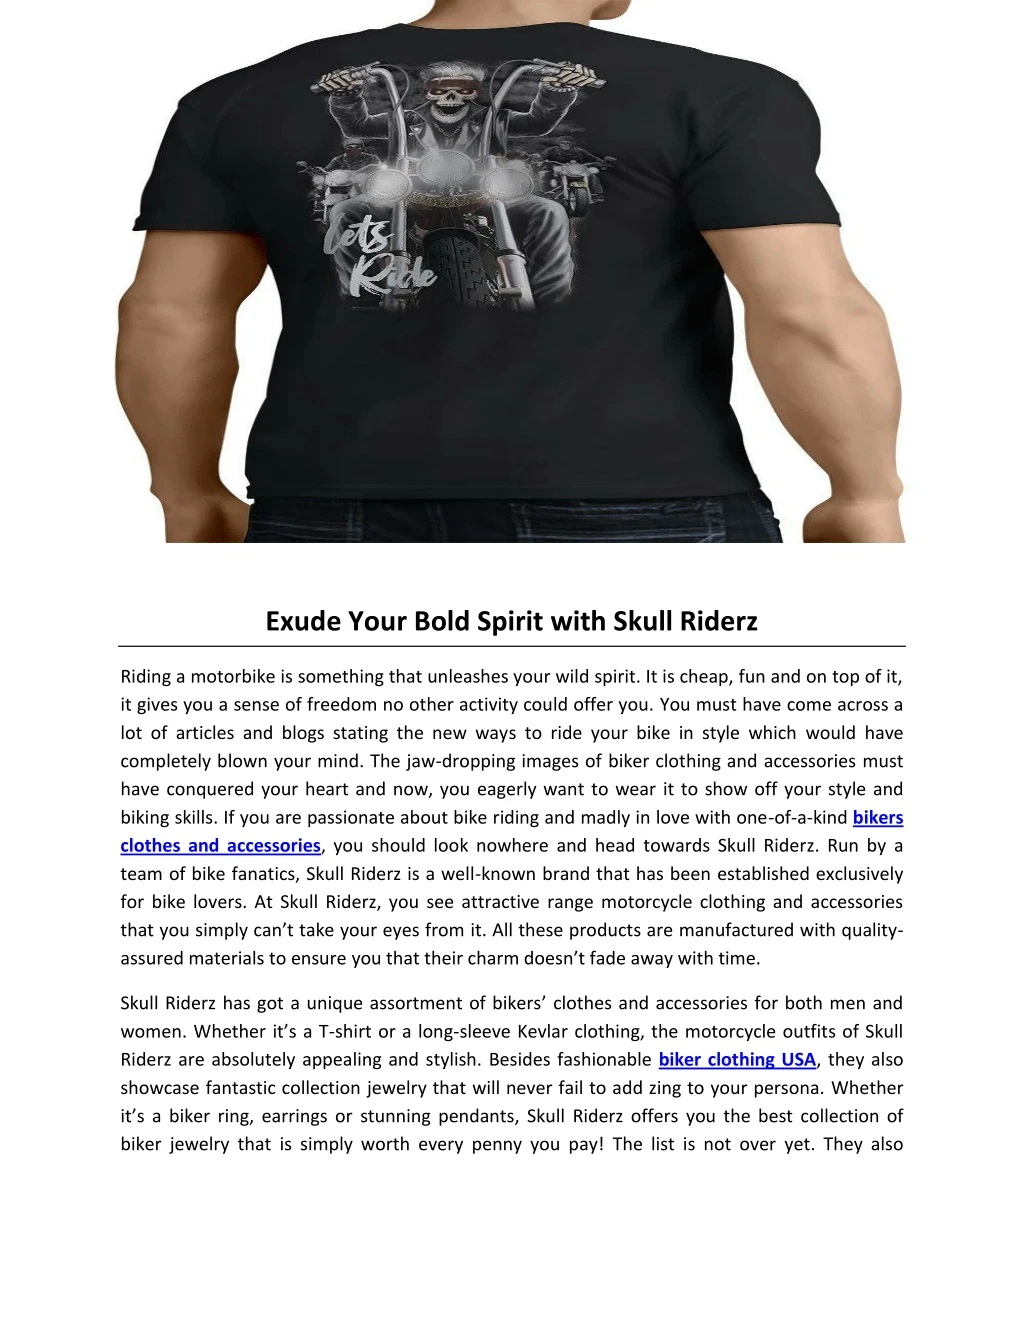 exude your bold spirit with skull riderz